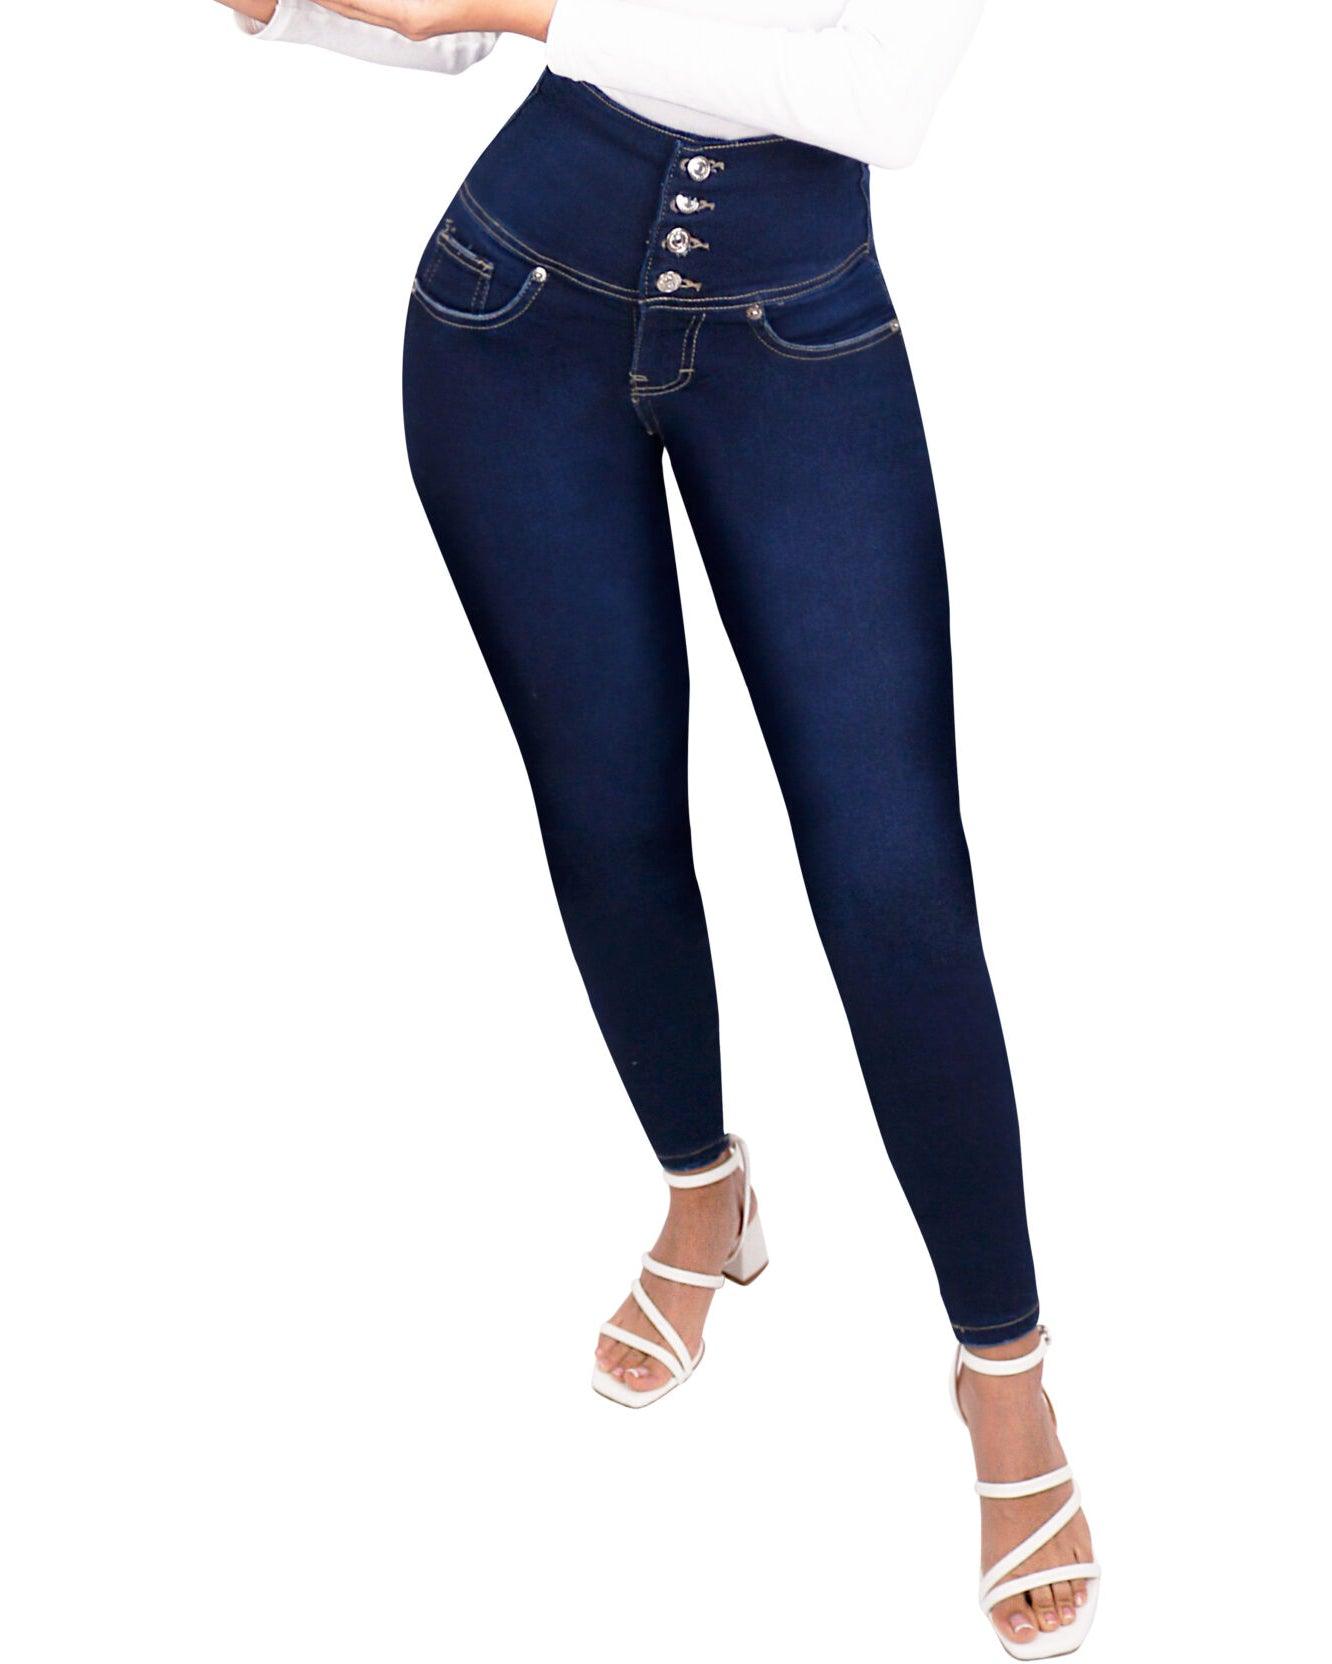 Wishe Butt Lifting Jeans Curvy Stretchy Jeans High Waist